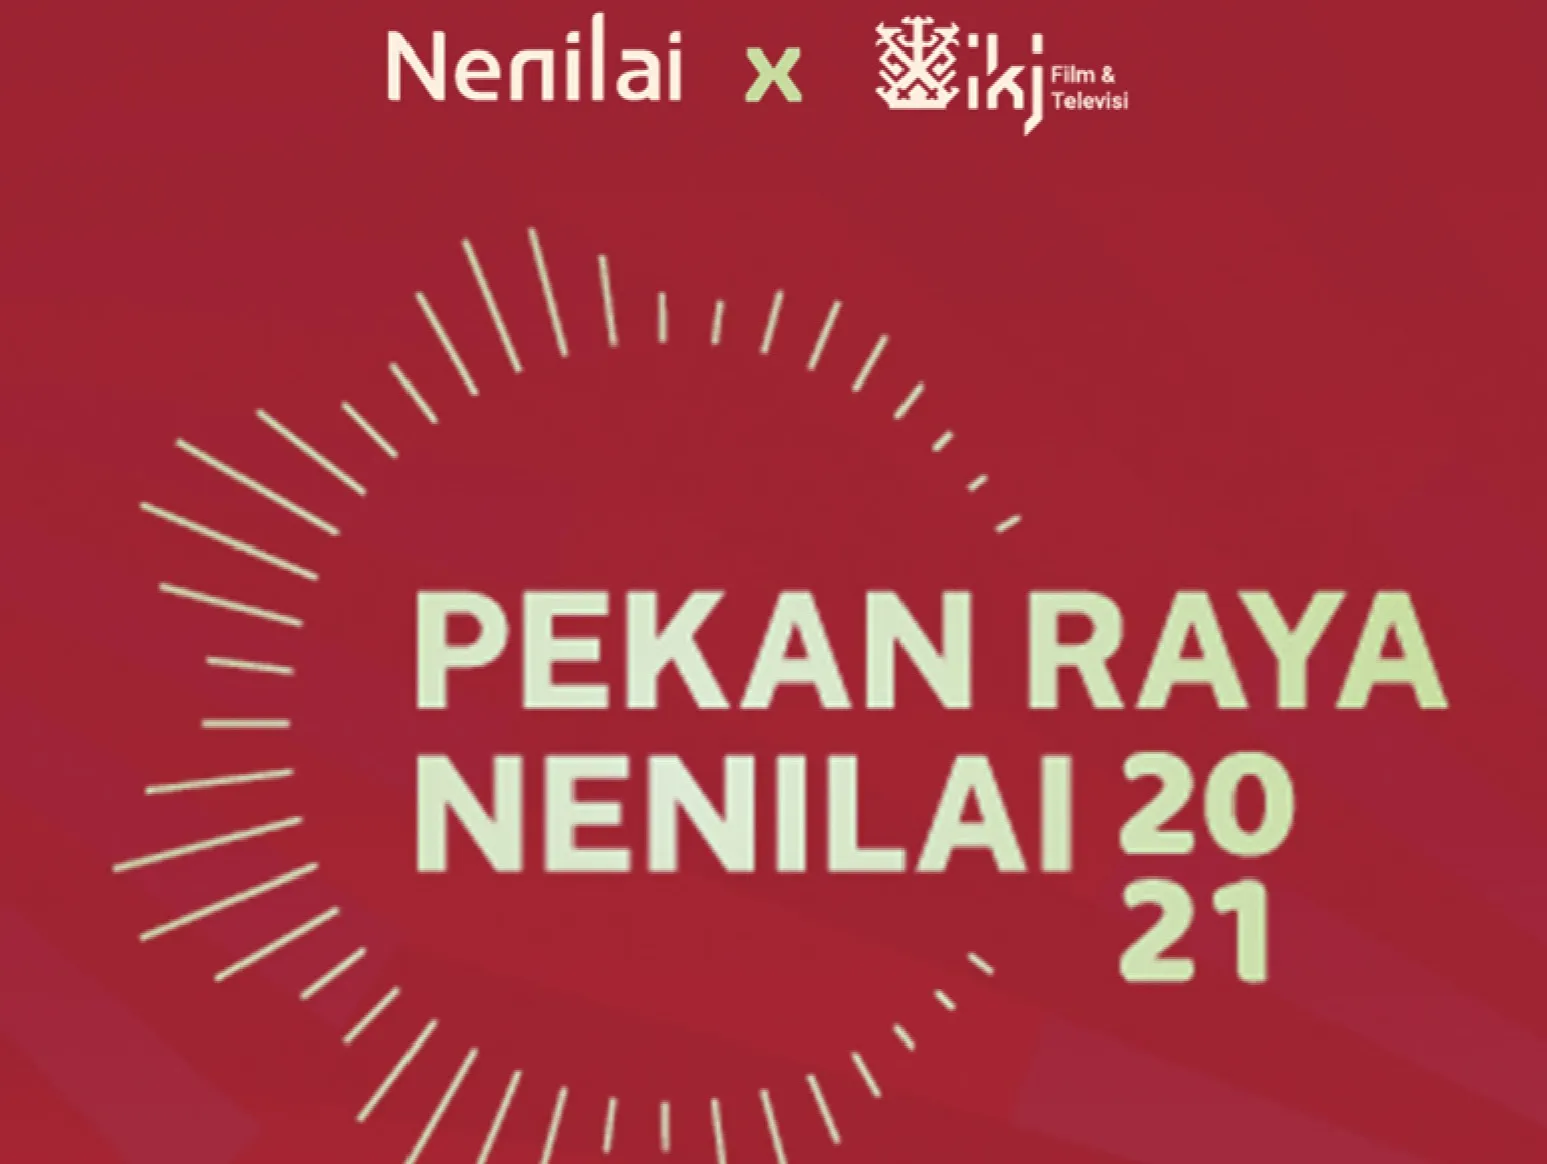 Events: The Nenilai Fair â€” The manifestation of diversity on cinema screen, discussion room, and creative industry in Indonesia